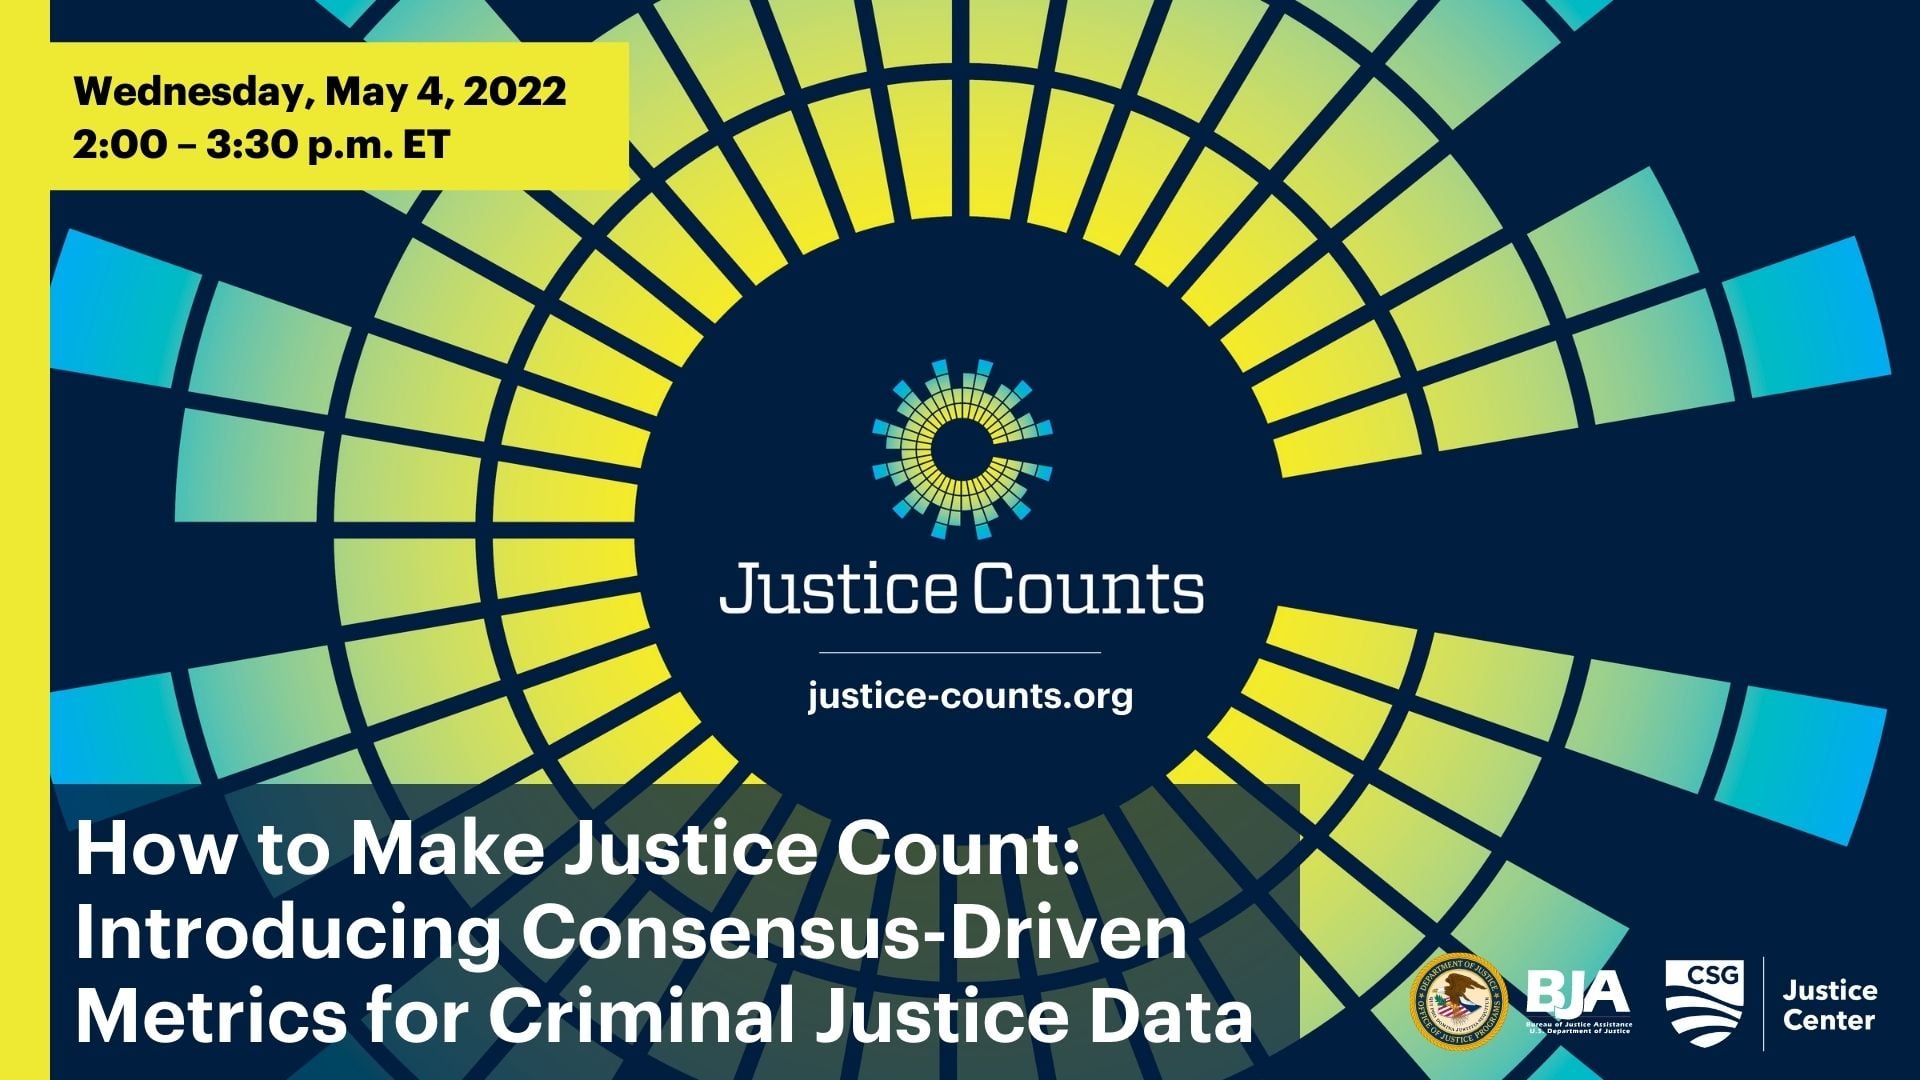 How to Make Justice Count: May 4, 2022 event